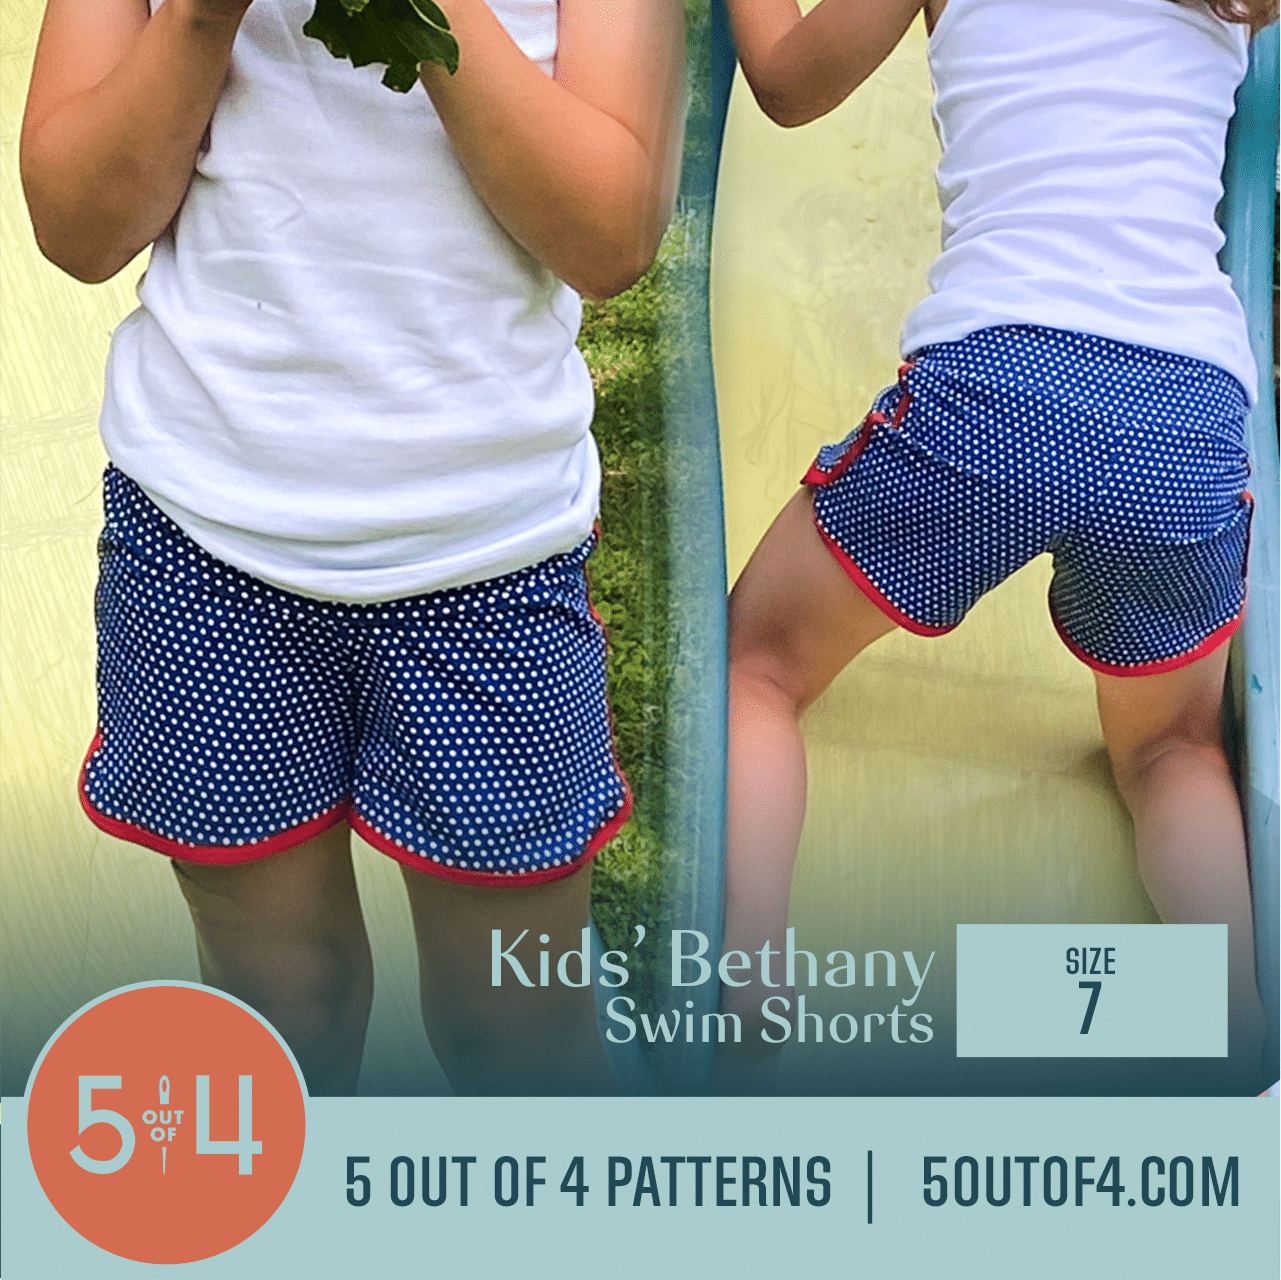 Kids' Bethany Swim Shorts - 5 out of 4 Patterns